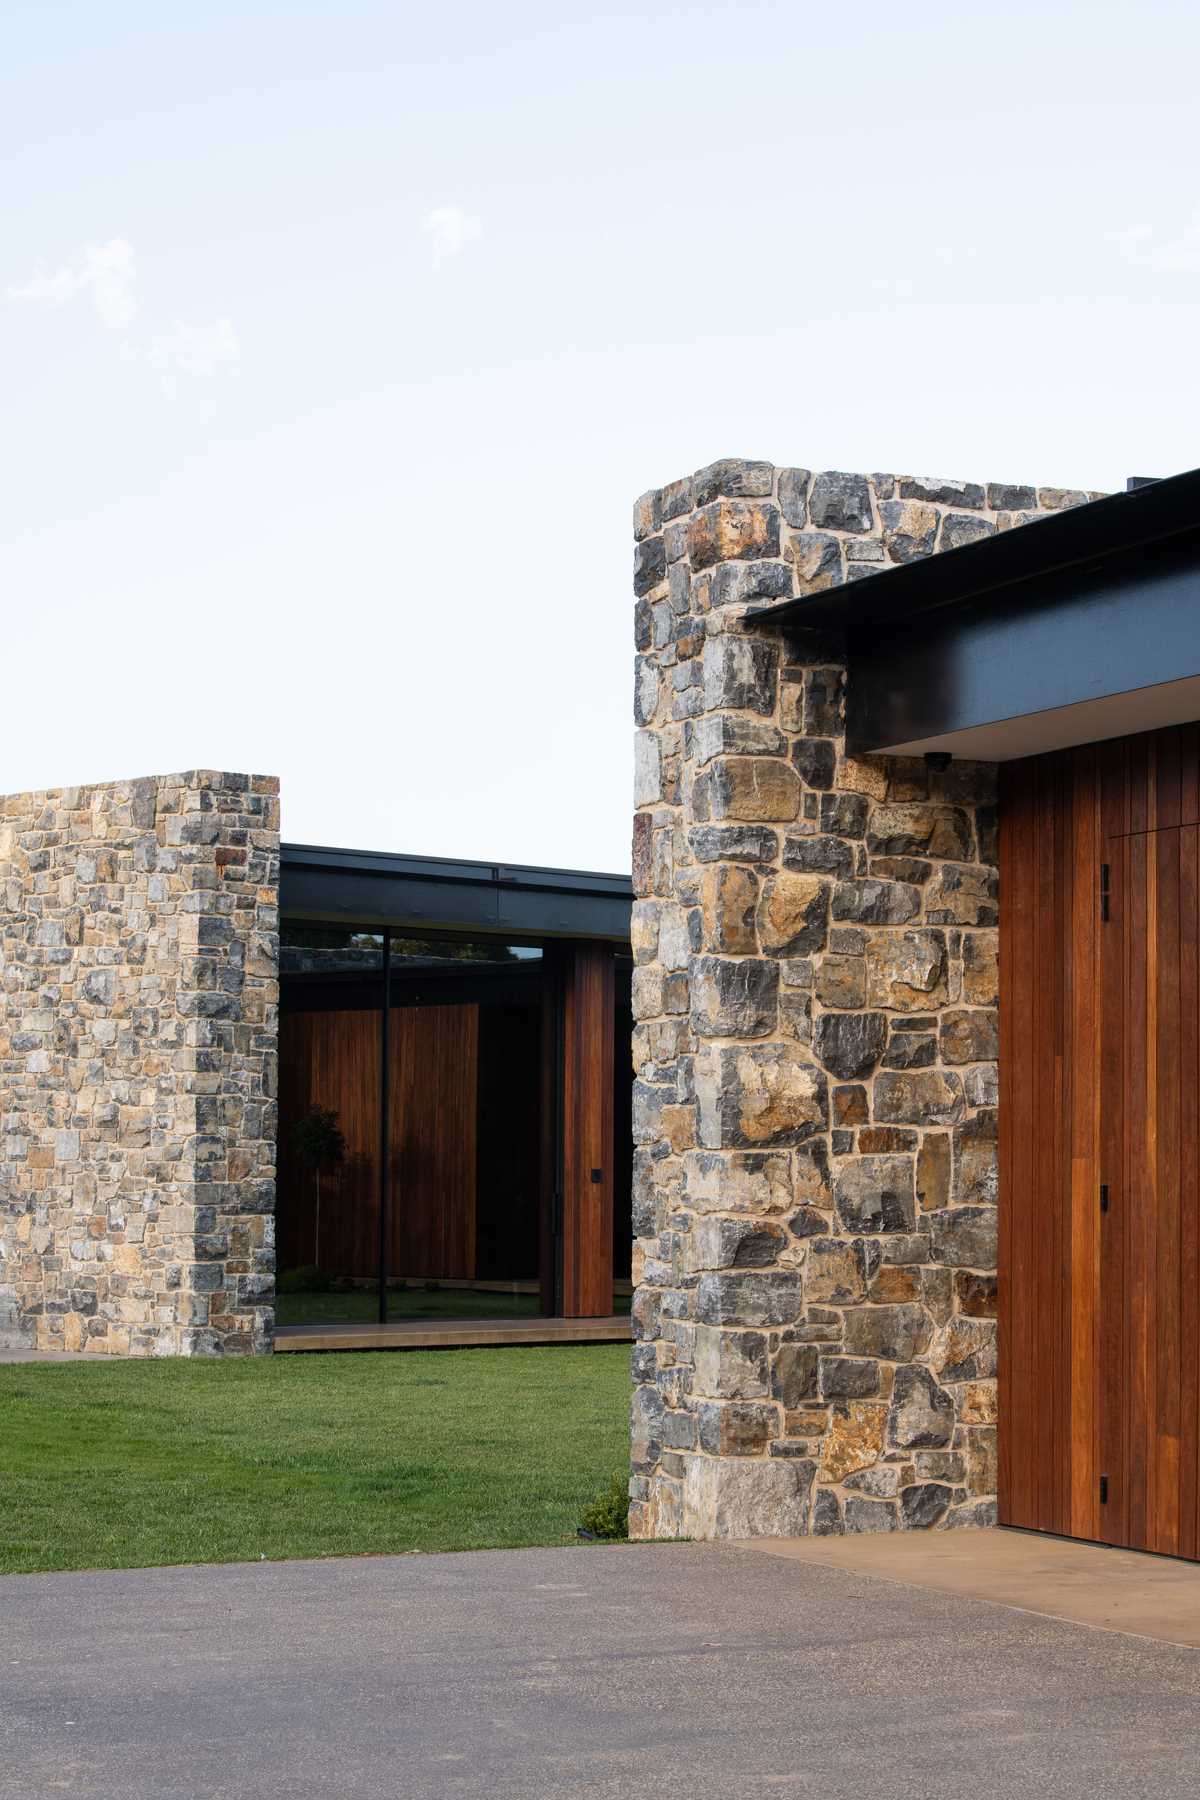 Mudstone walls were chosen as the core material for this modern house.